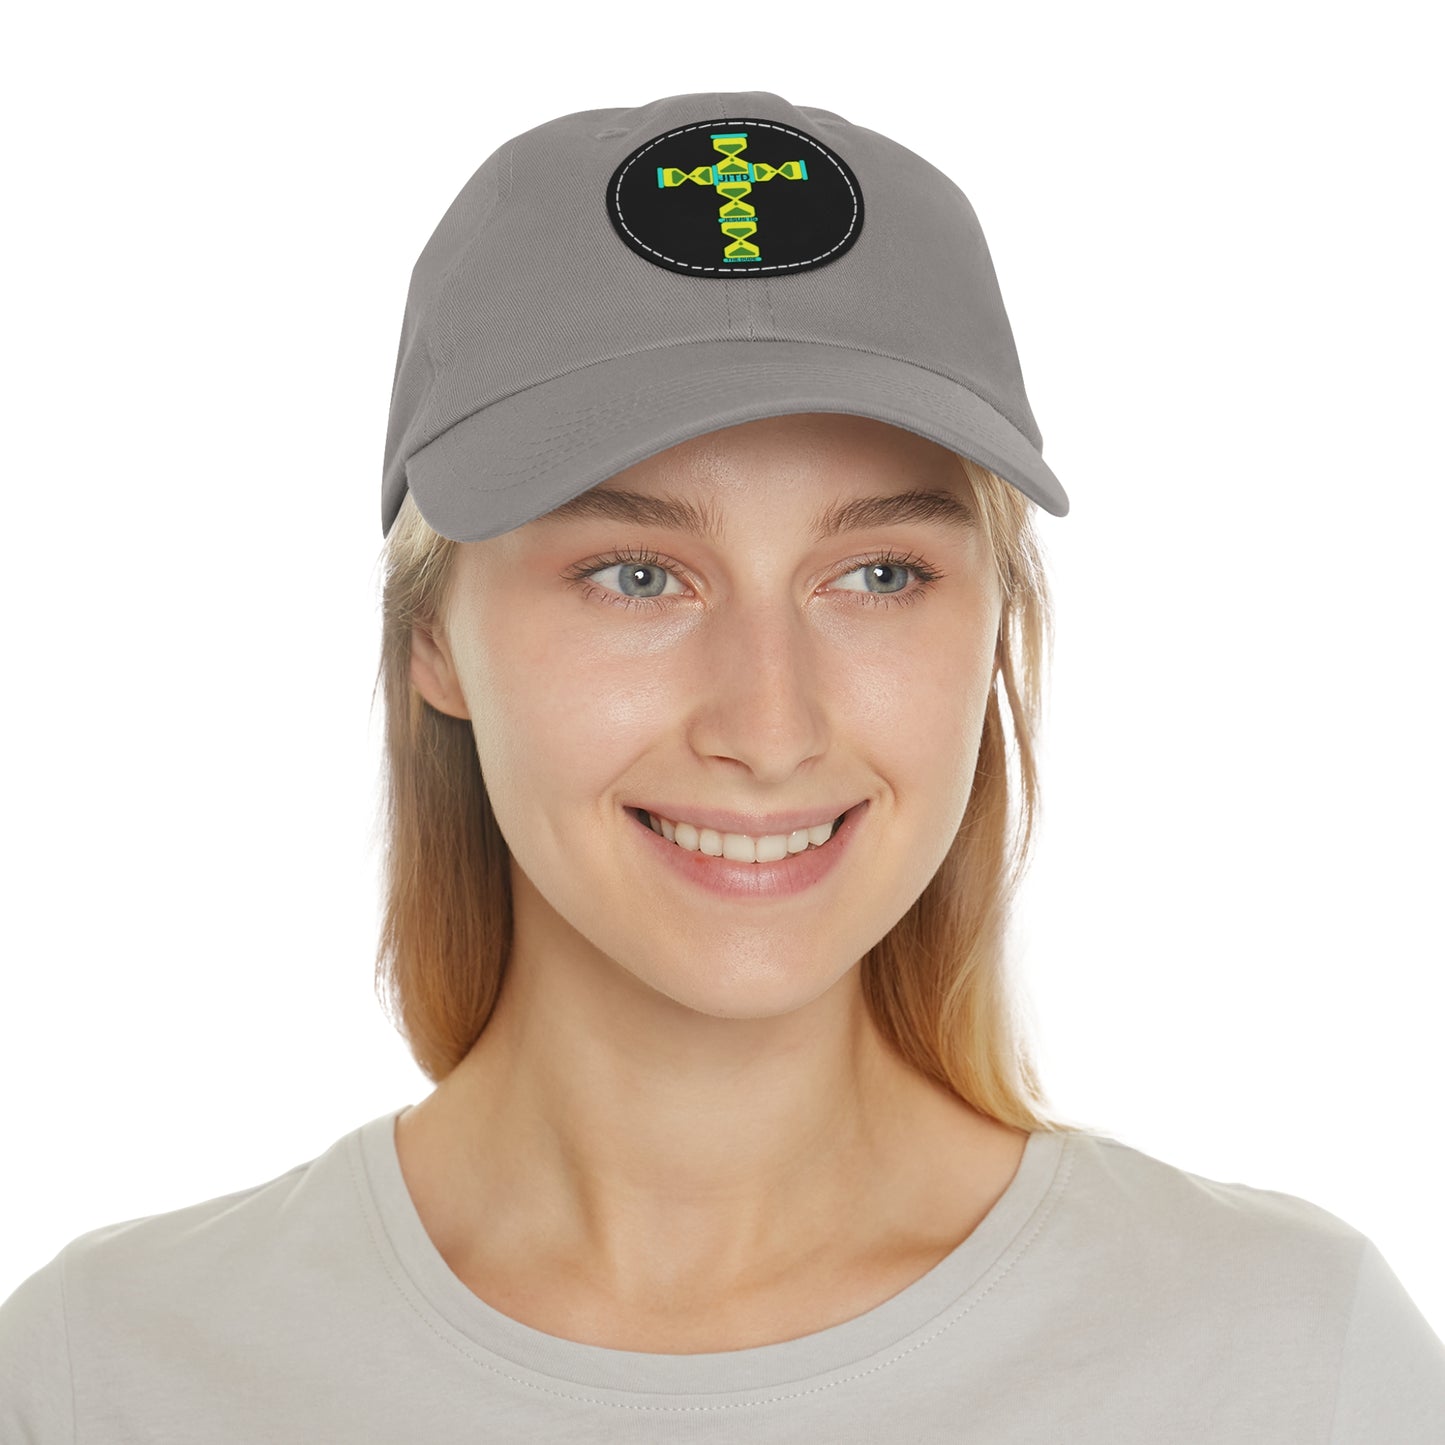 JITD HOURGLASS CROSS HAT WITH LEATHER PATCH